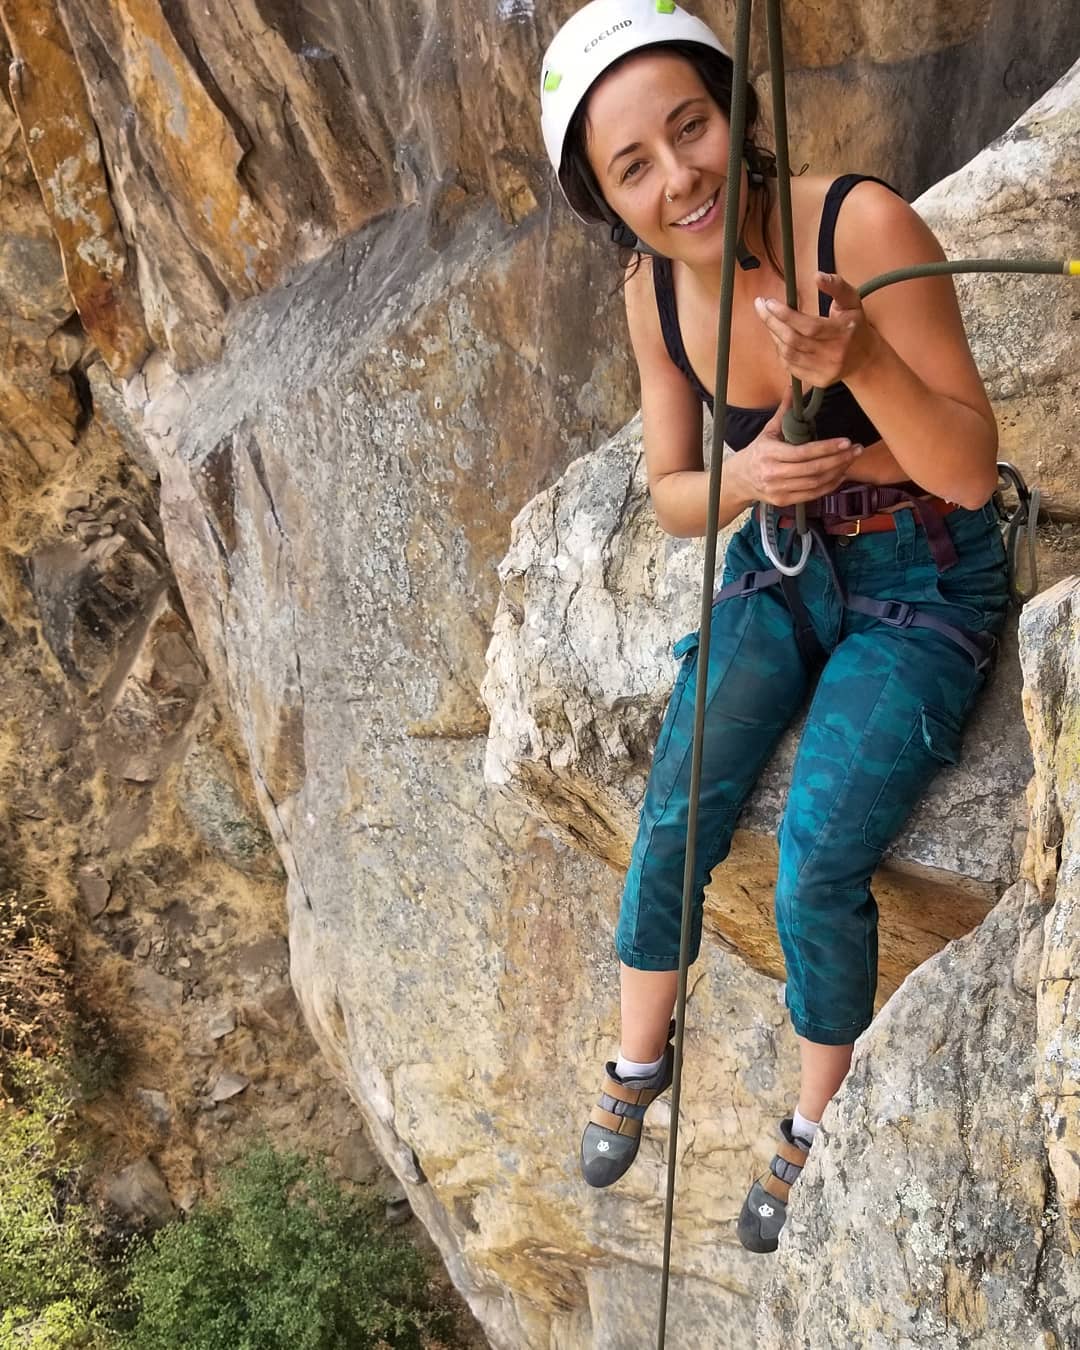 @danzaconelviento just hanging out and enjoying the accomplishment of finishing her climb ...#chillinorockclimbing #rockclimbing #sandiego #sandiegorockclimbing #guide #guiding #climbing_pictures_of_instagram #klettern #escalade #grimper #optoutside #neverstopexploring ...@danzaconelviento